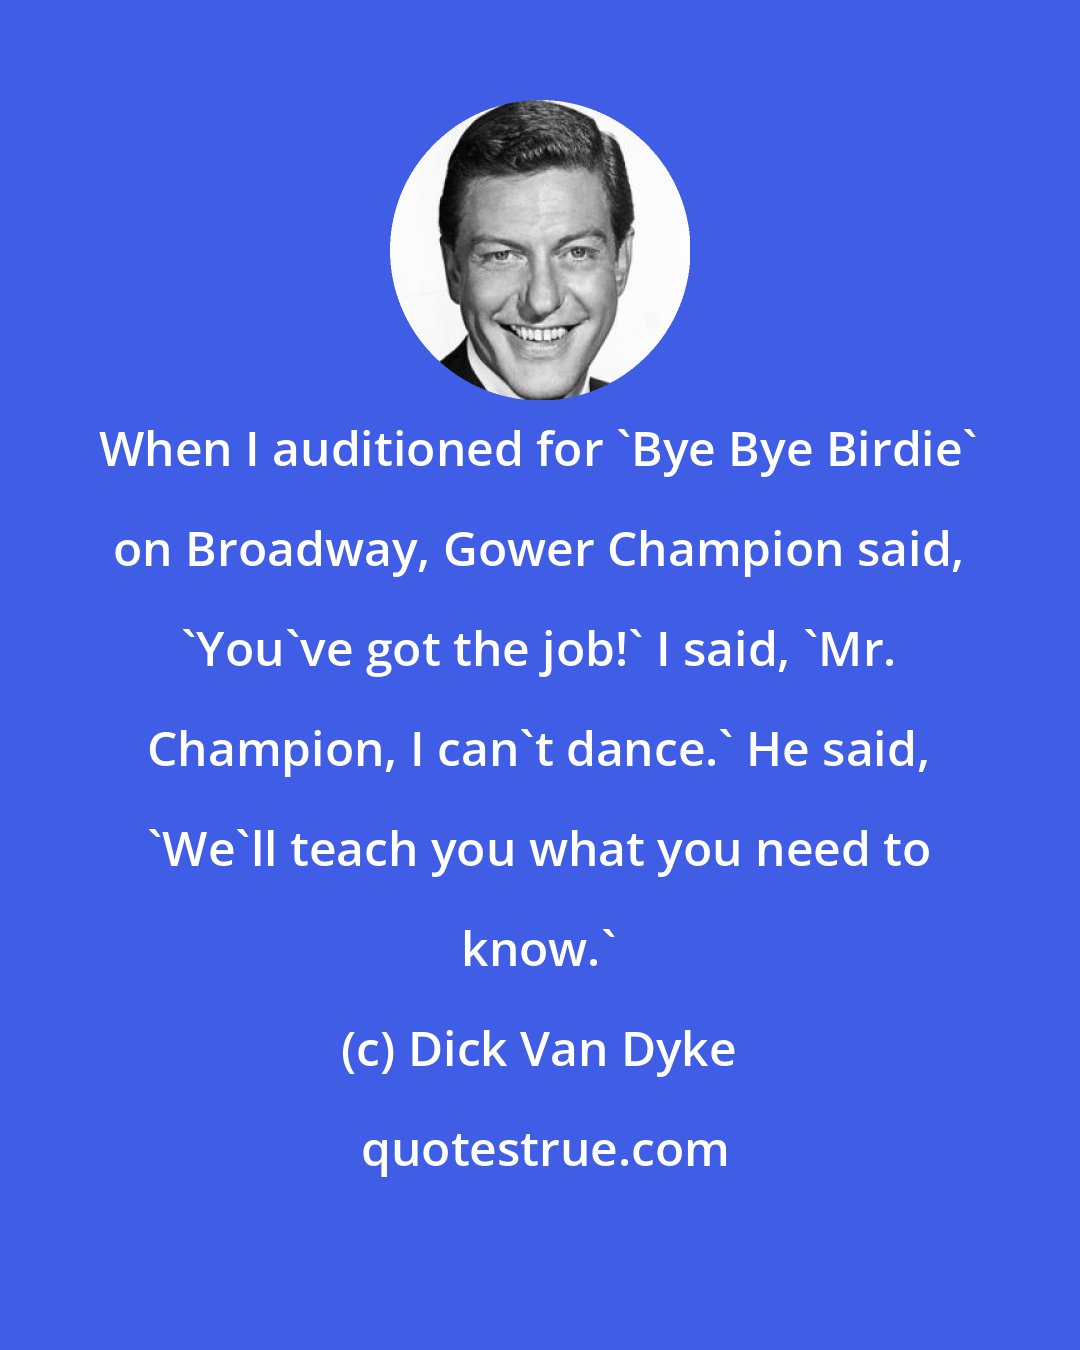 Dick Van Dyke: When I auditioned for 'Bye Bye Birdie' on Broadway, Gower Champion said, 'You've got the job!' I said, 'Mr. Champion, I can't dance.' He said, 'We'll teach you what you need to know.'